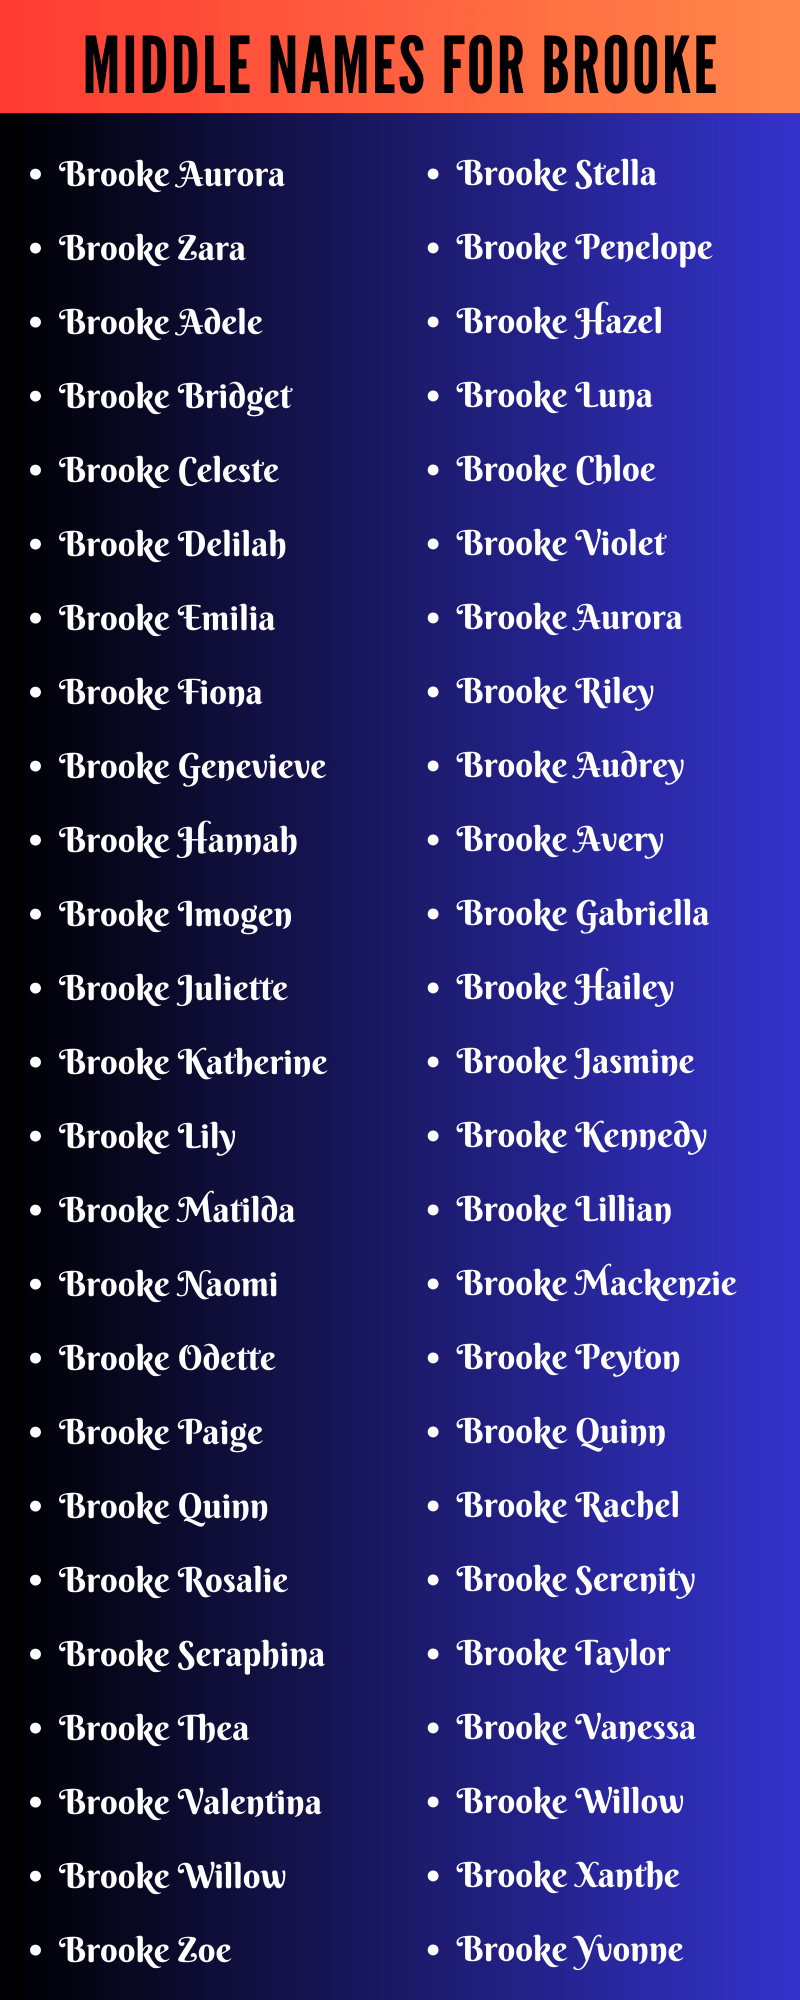 Middle Names For Brooke